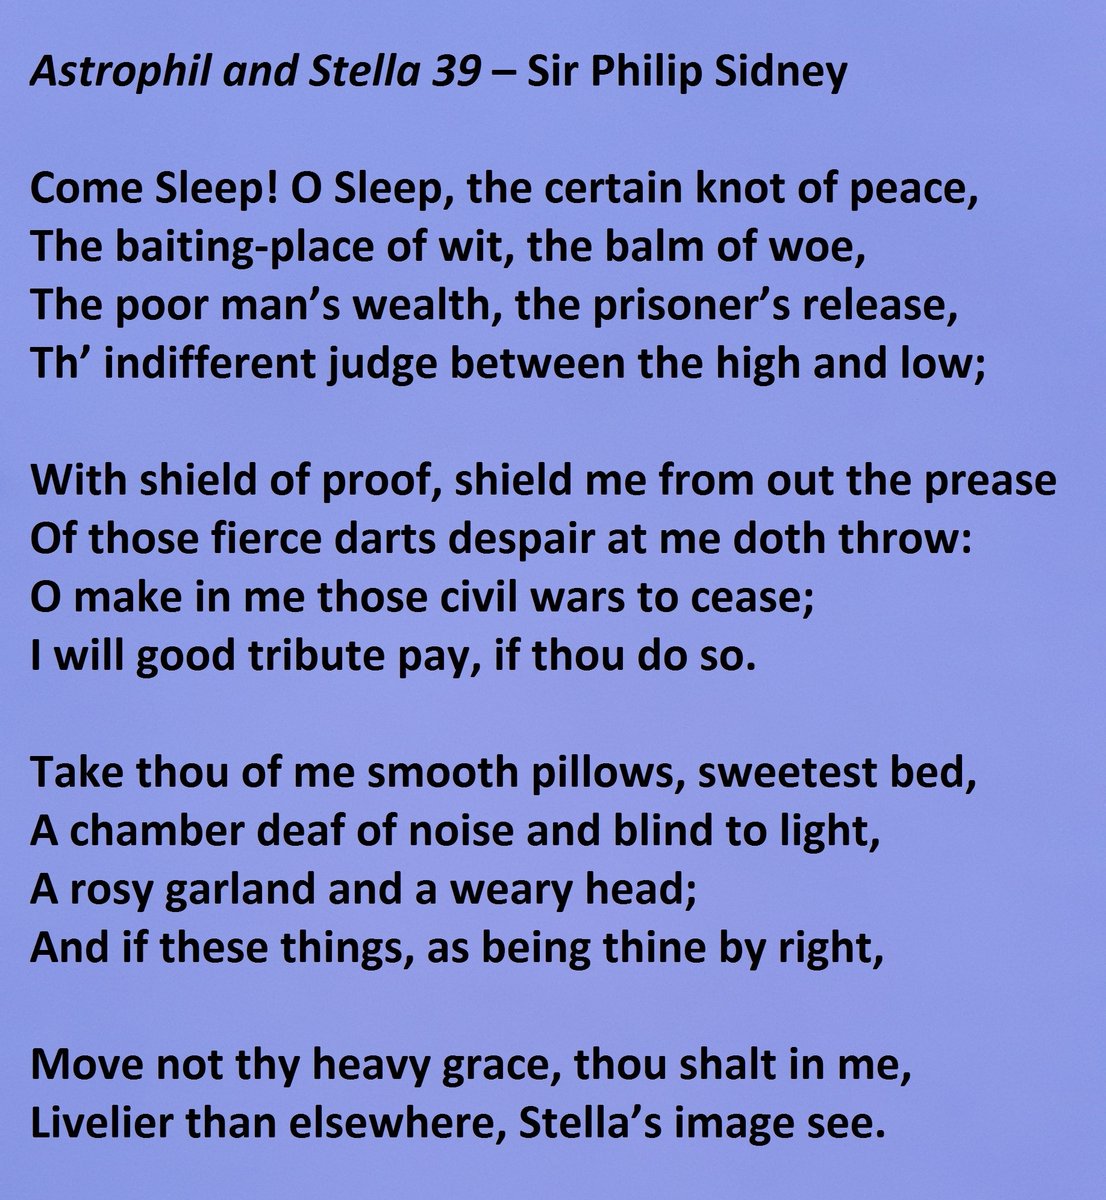 Astrophil and Stella Sonnet 39 by Sir Philip Sidney - "Come Sleep! O Sleep, the certain knot of peace"